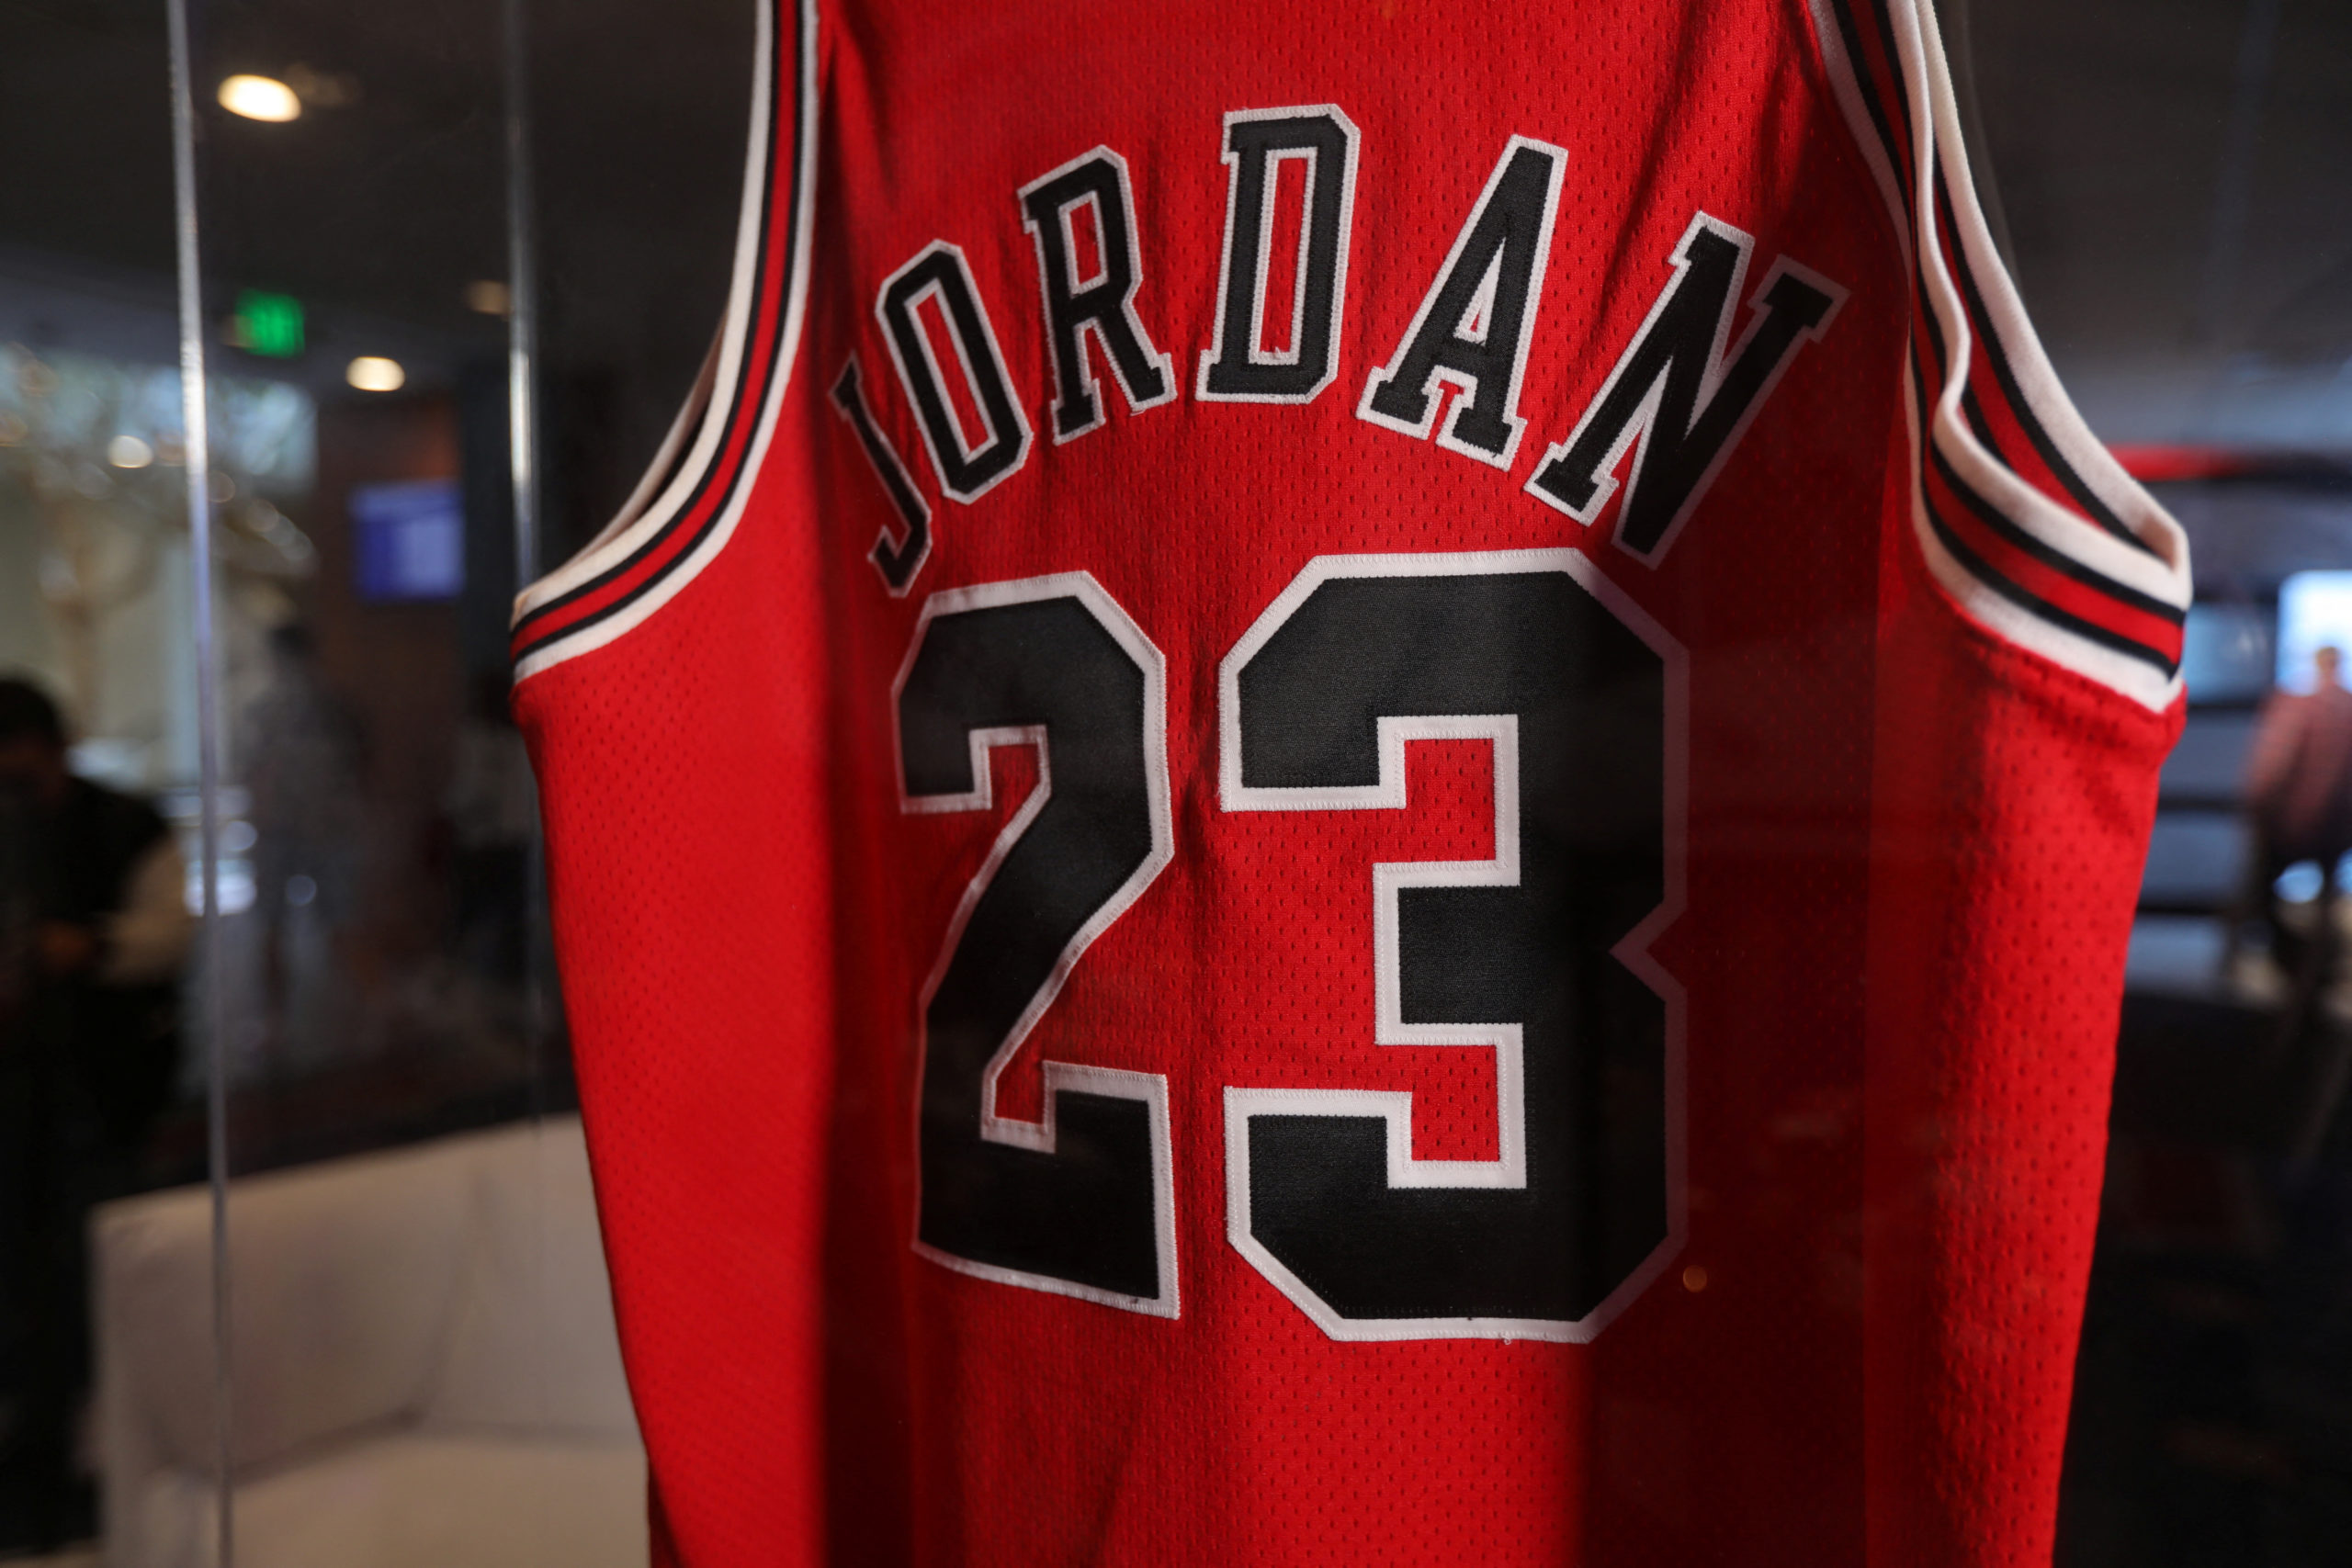 Michael Jordan's Game-Worn 'Last Dance' Jersey to Be Auctioned